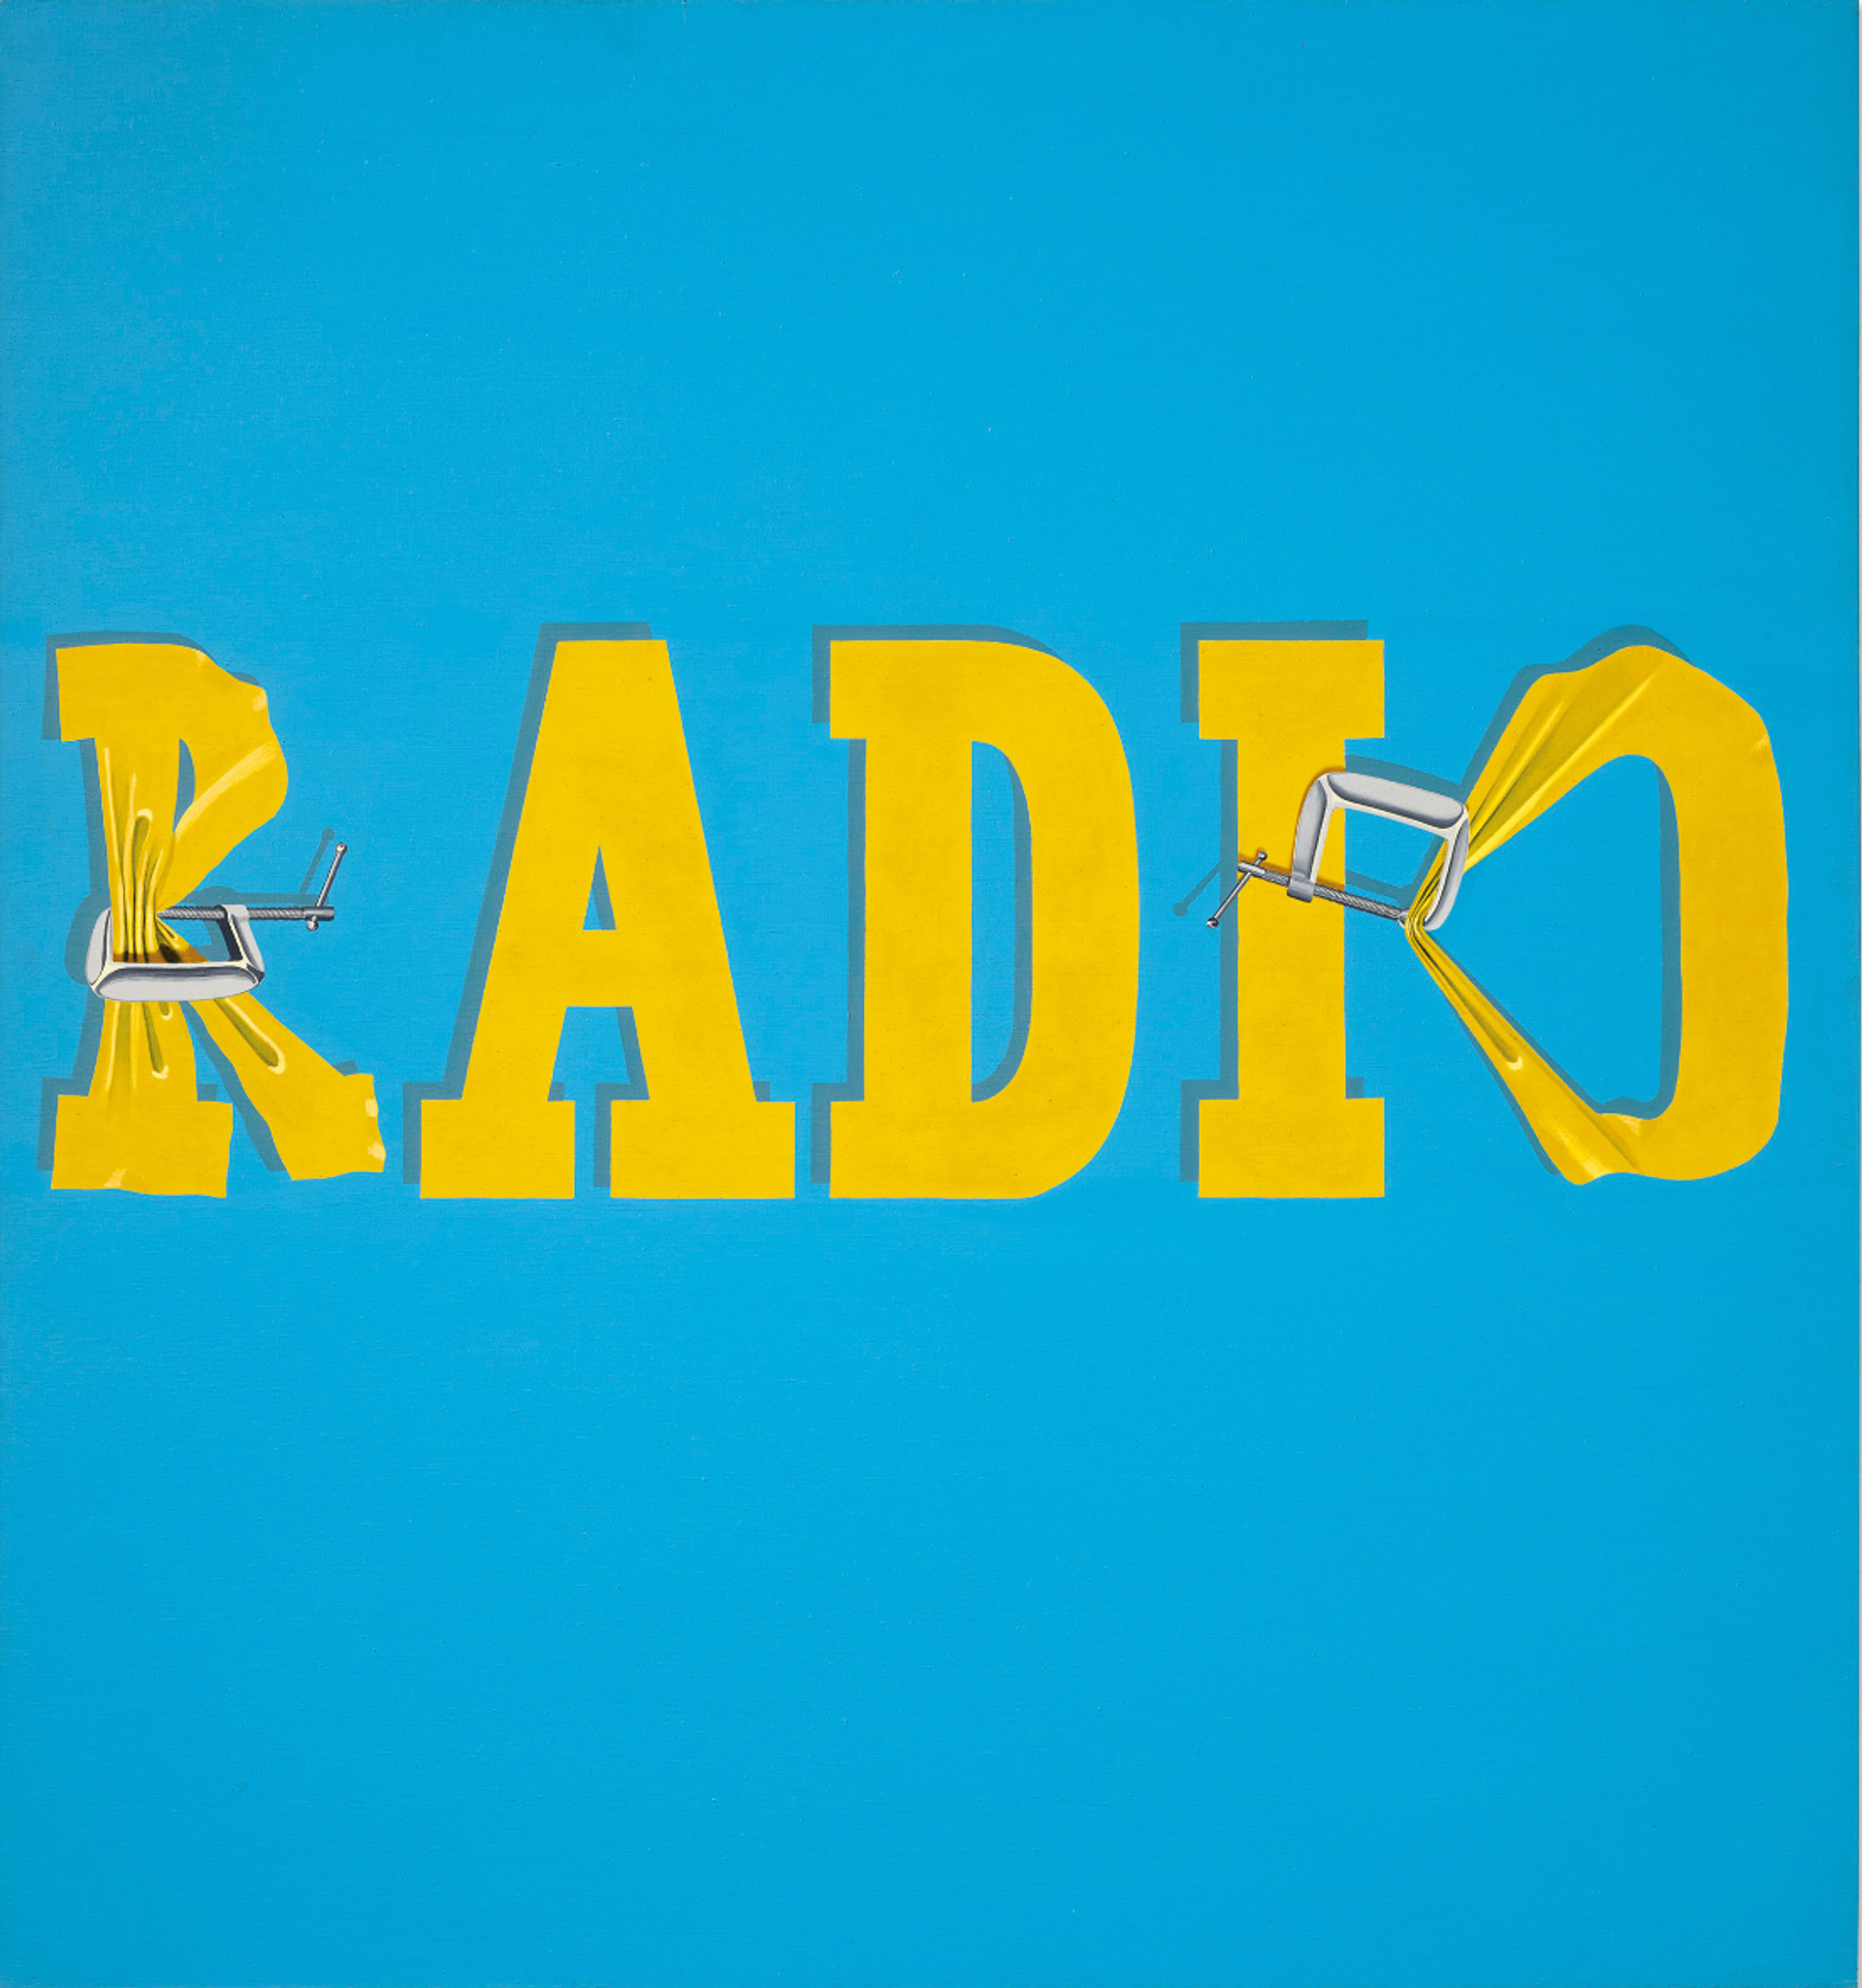 Painting by Ed Ruscha depicting the word 'RADIO' in capitalised, bold typography. The text is yellow and is set against a bright blue. The letters 'R' and 'O' are clamped, with the letters being squeezed and distorted.